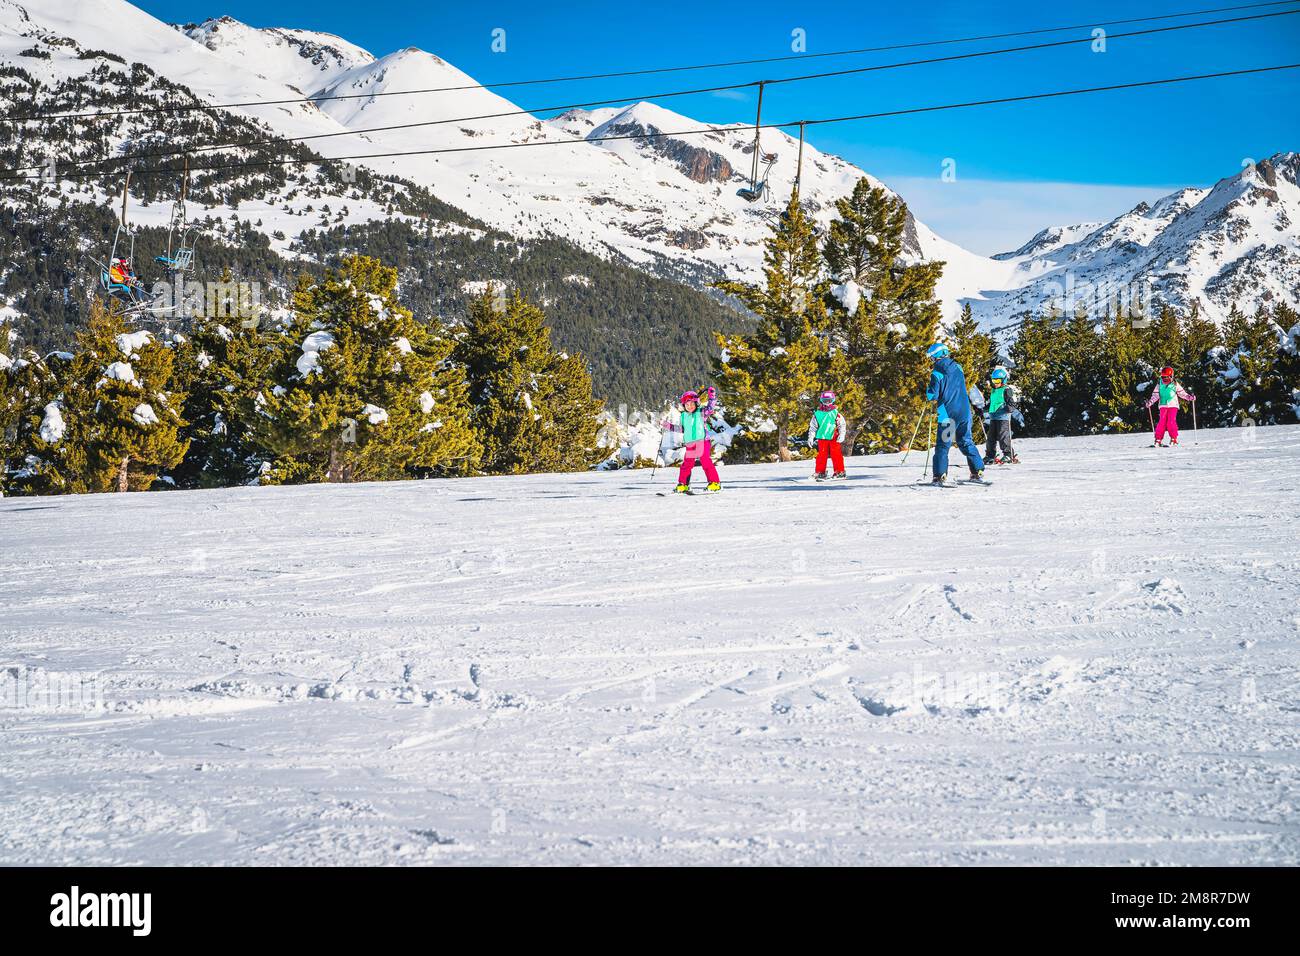 Ski instructor teaching a group of young kids how to ski in El Tarter green slope. Winter holidays in Andorra, Pyrenees Mountains, Grandvalira Stock Photo